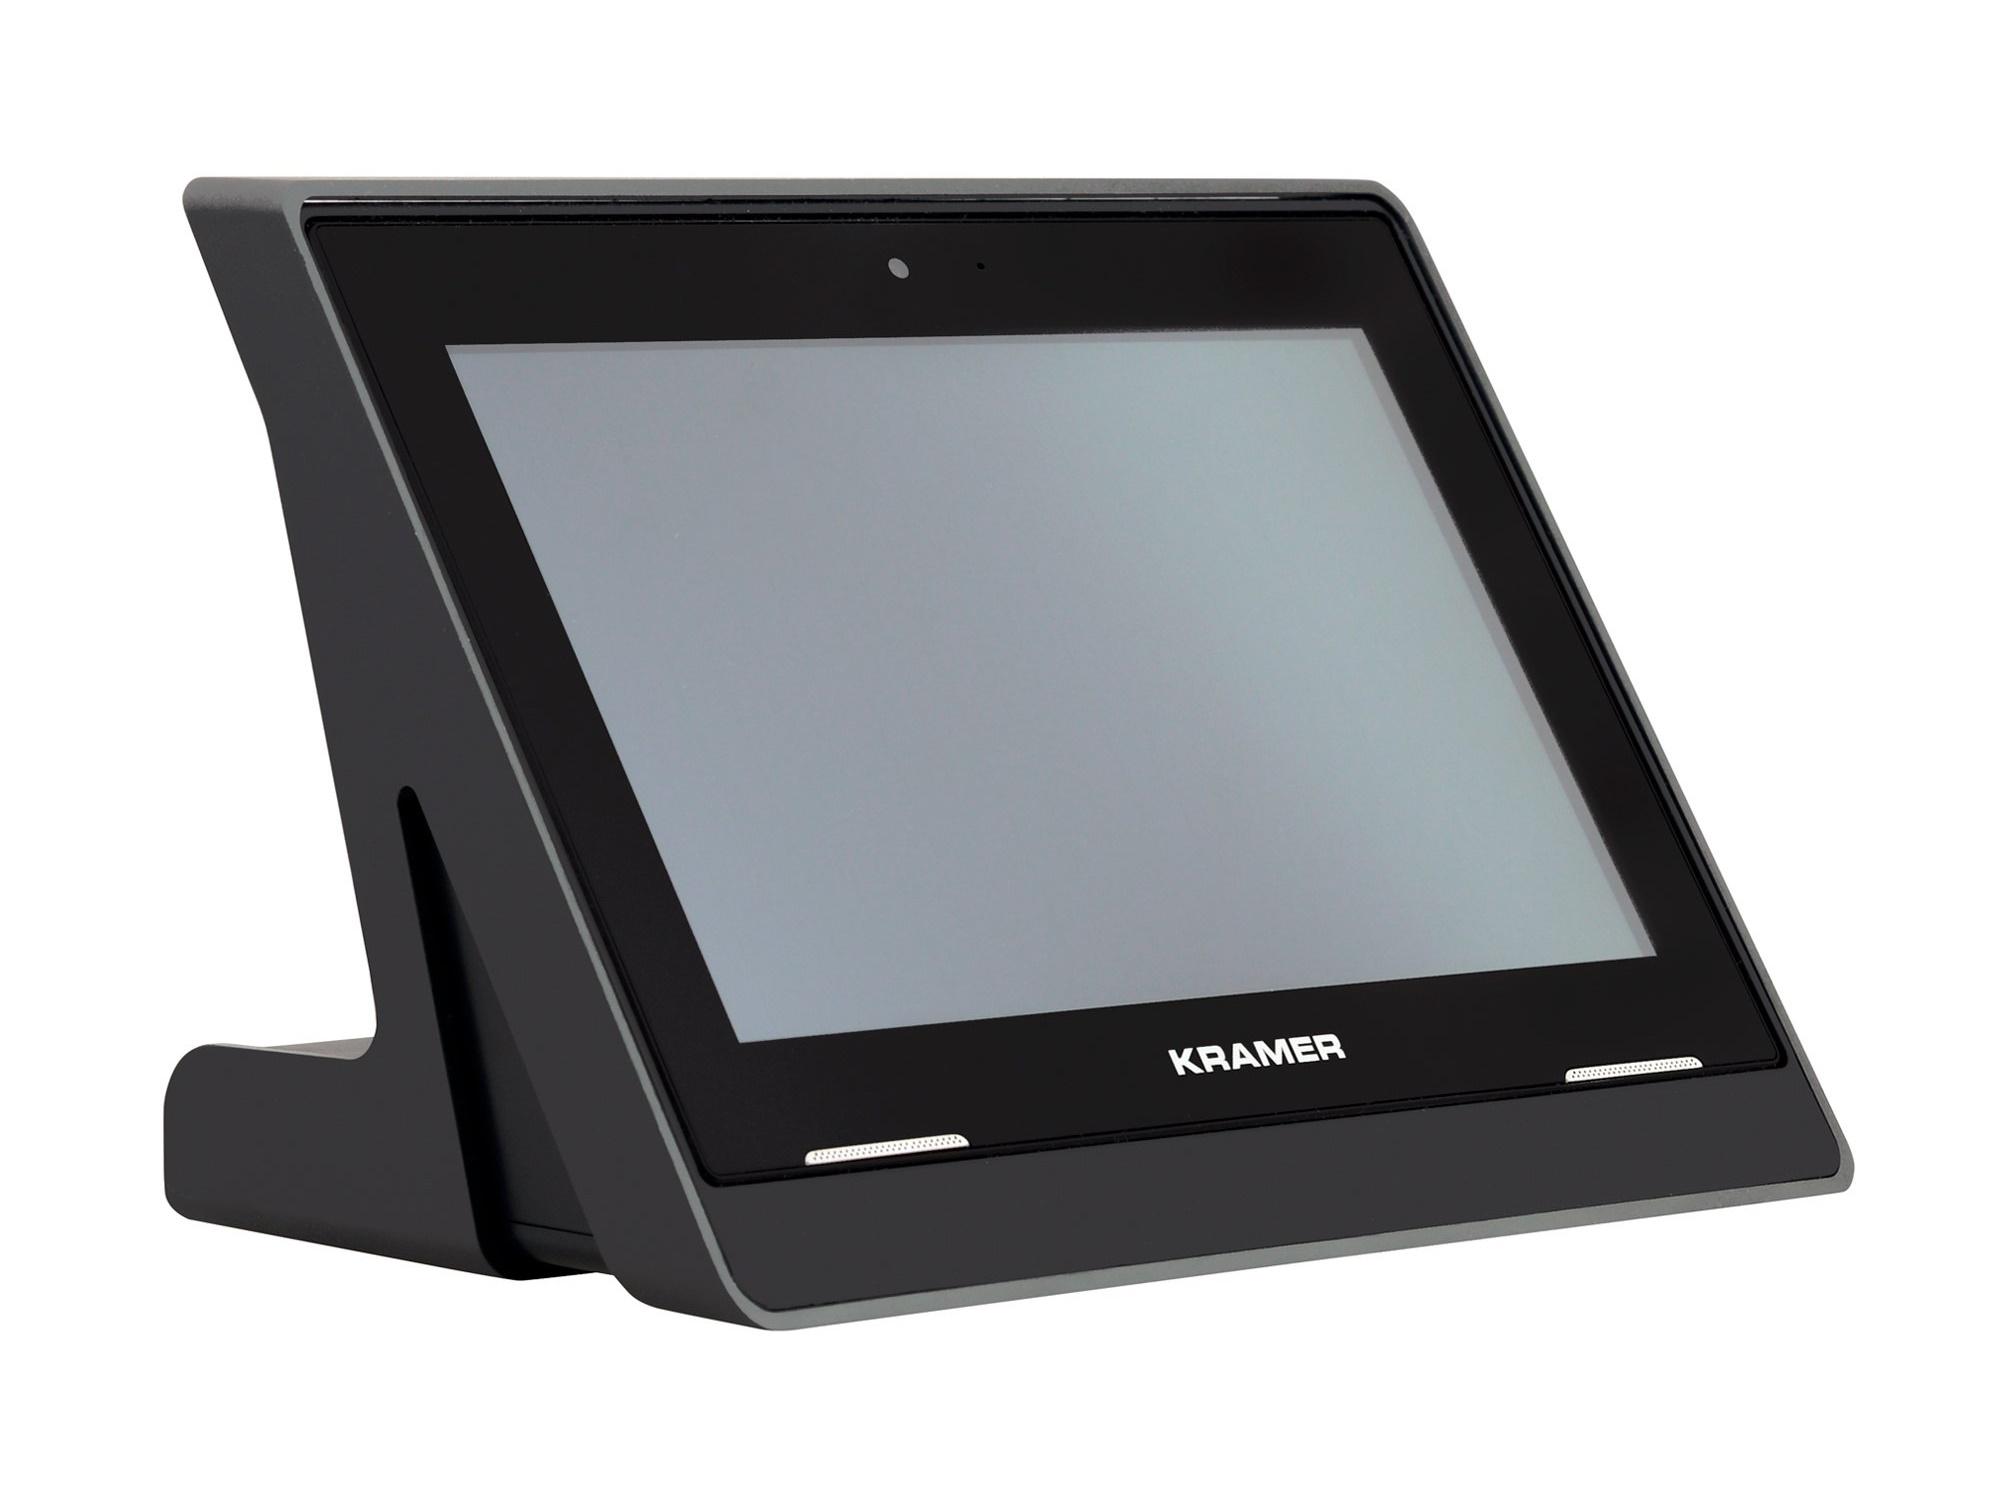 KT-107S Secured 7-Inch Wall/Table Mount PoE Touch Panel by Kramer